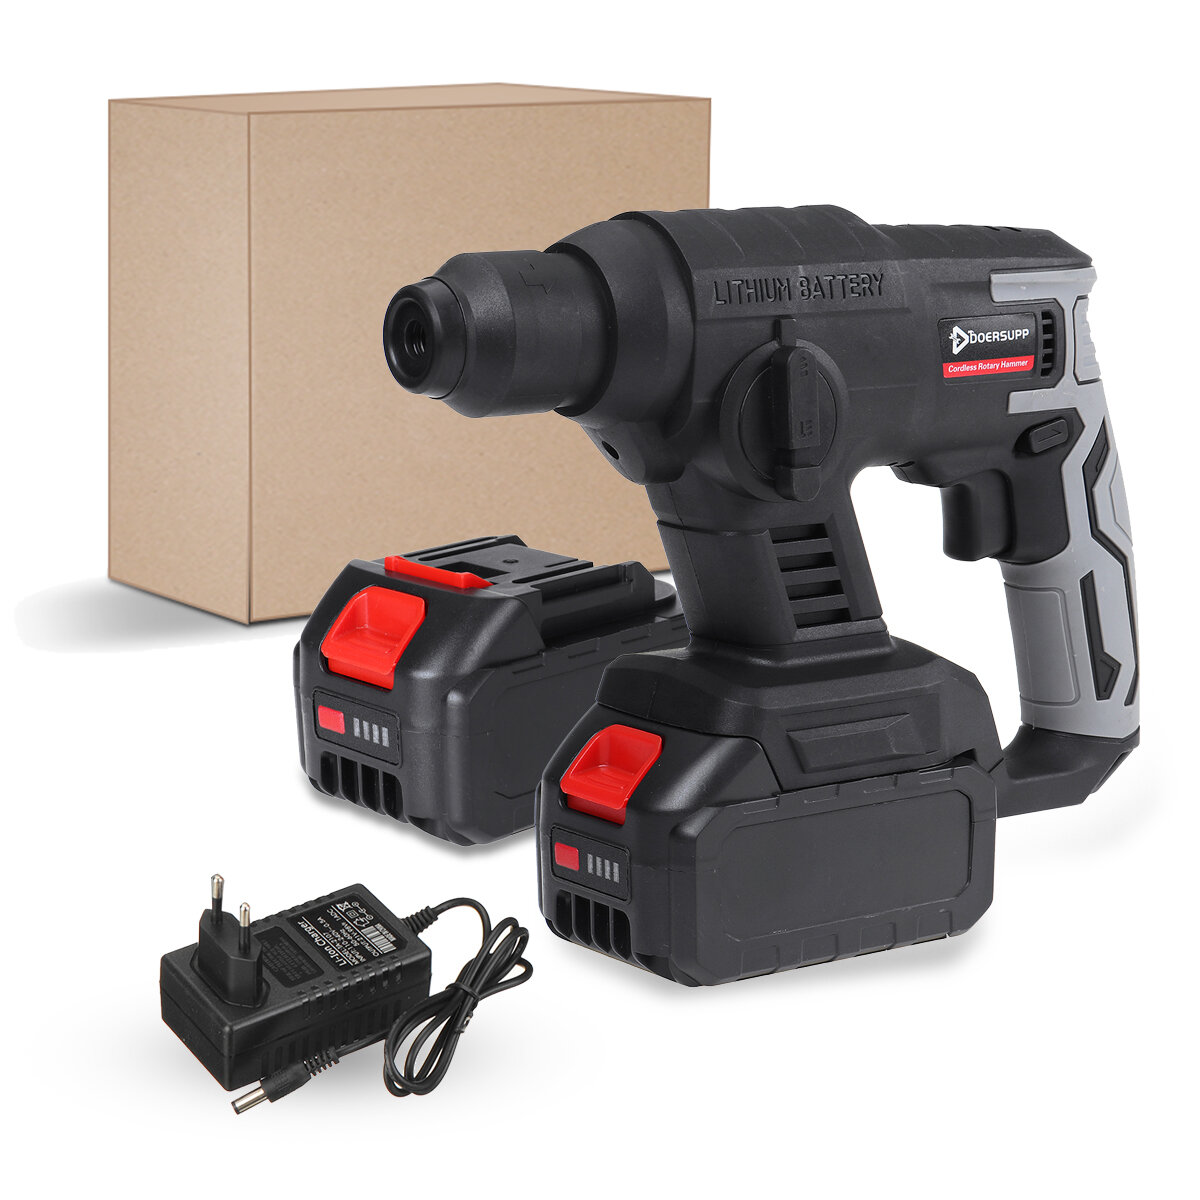 Doersupp Brushles Cordless Electric Rotary Hammer Drill Battery Indicator Rechargeable Impact Hammer Drill Tool W/ 1/2 B